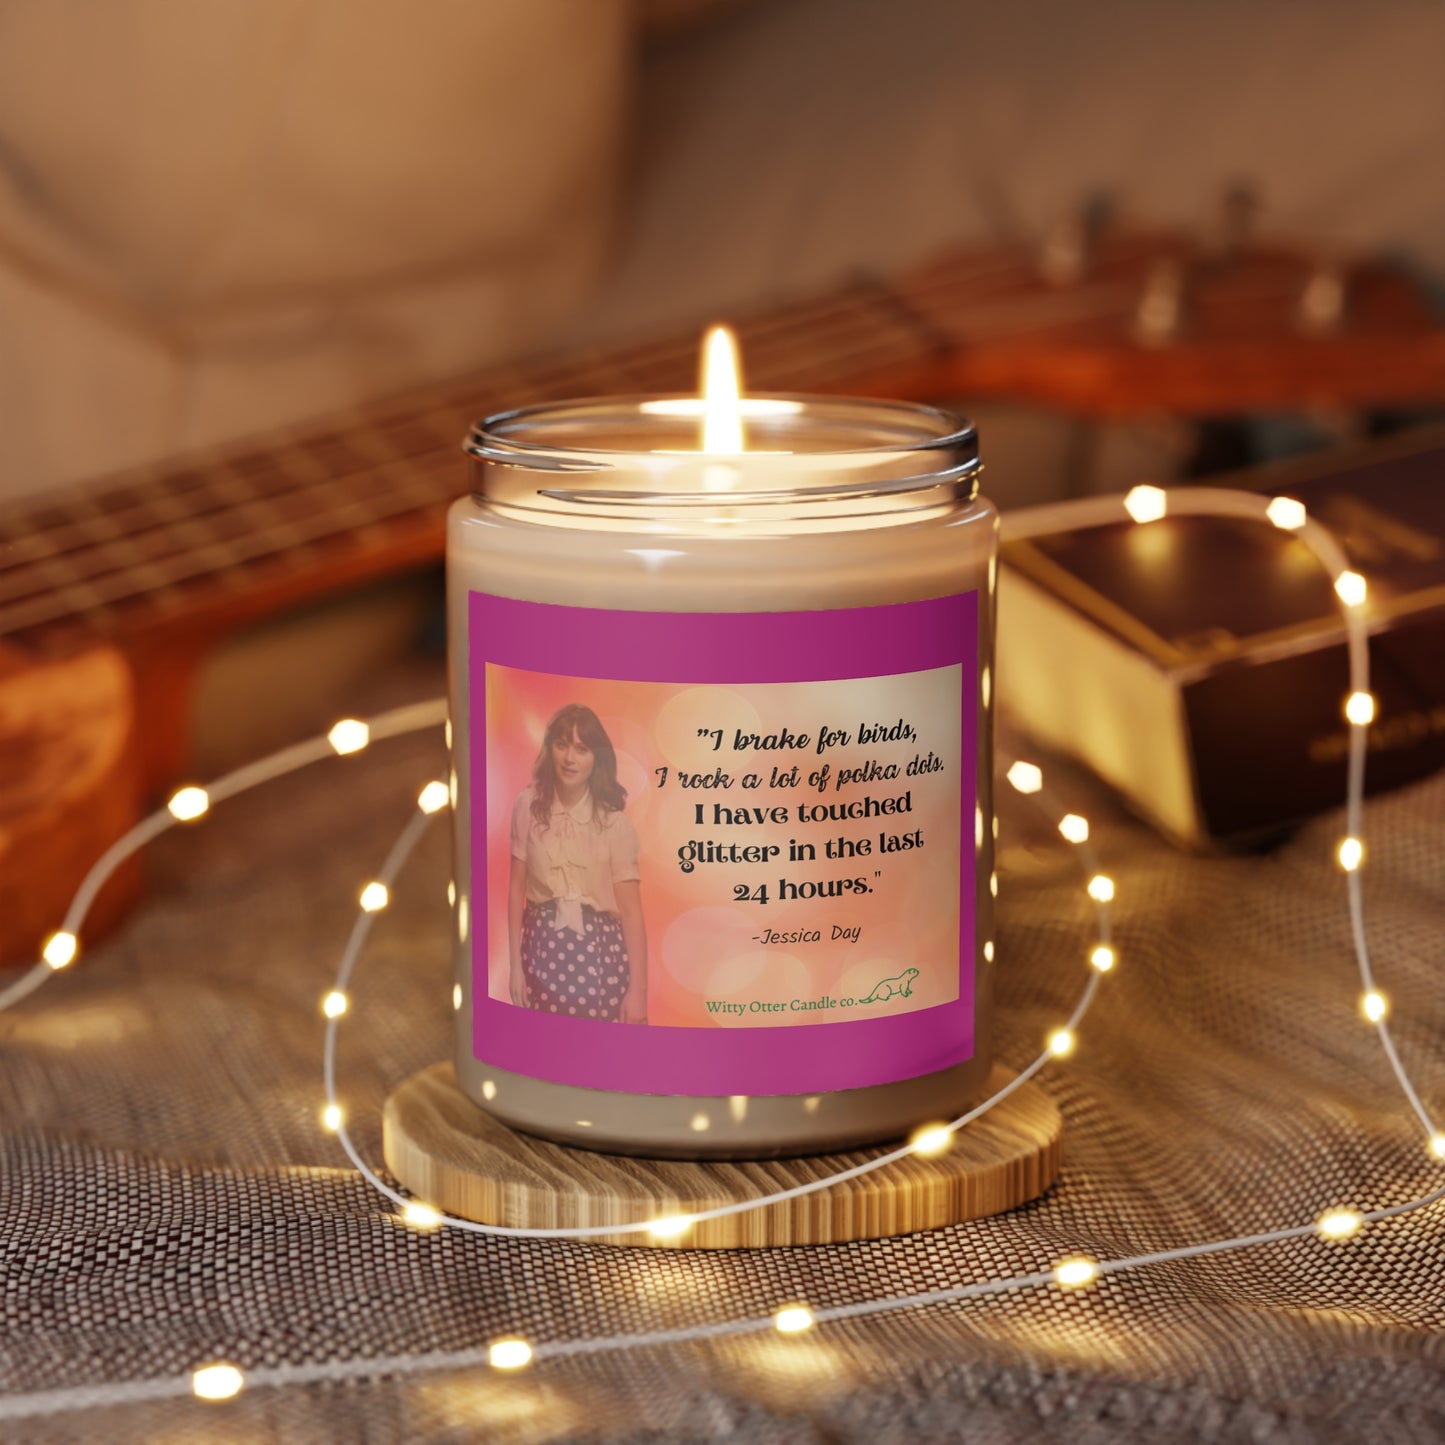 Jess Day "teacher" quote 9oz soy candle | New Girl show candle